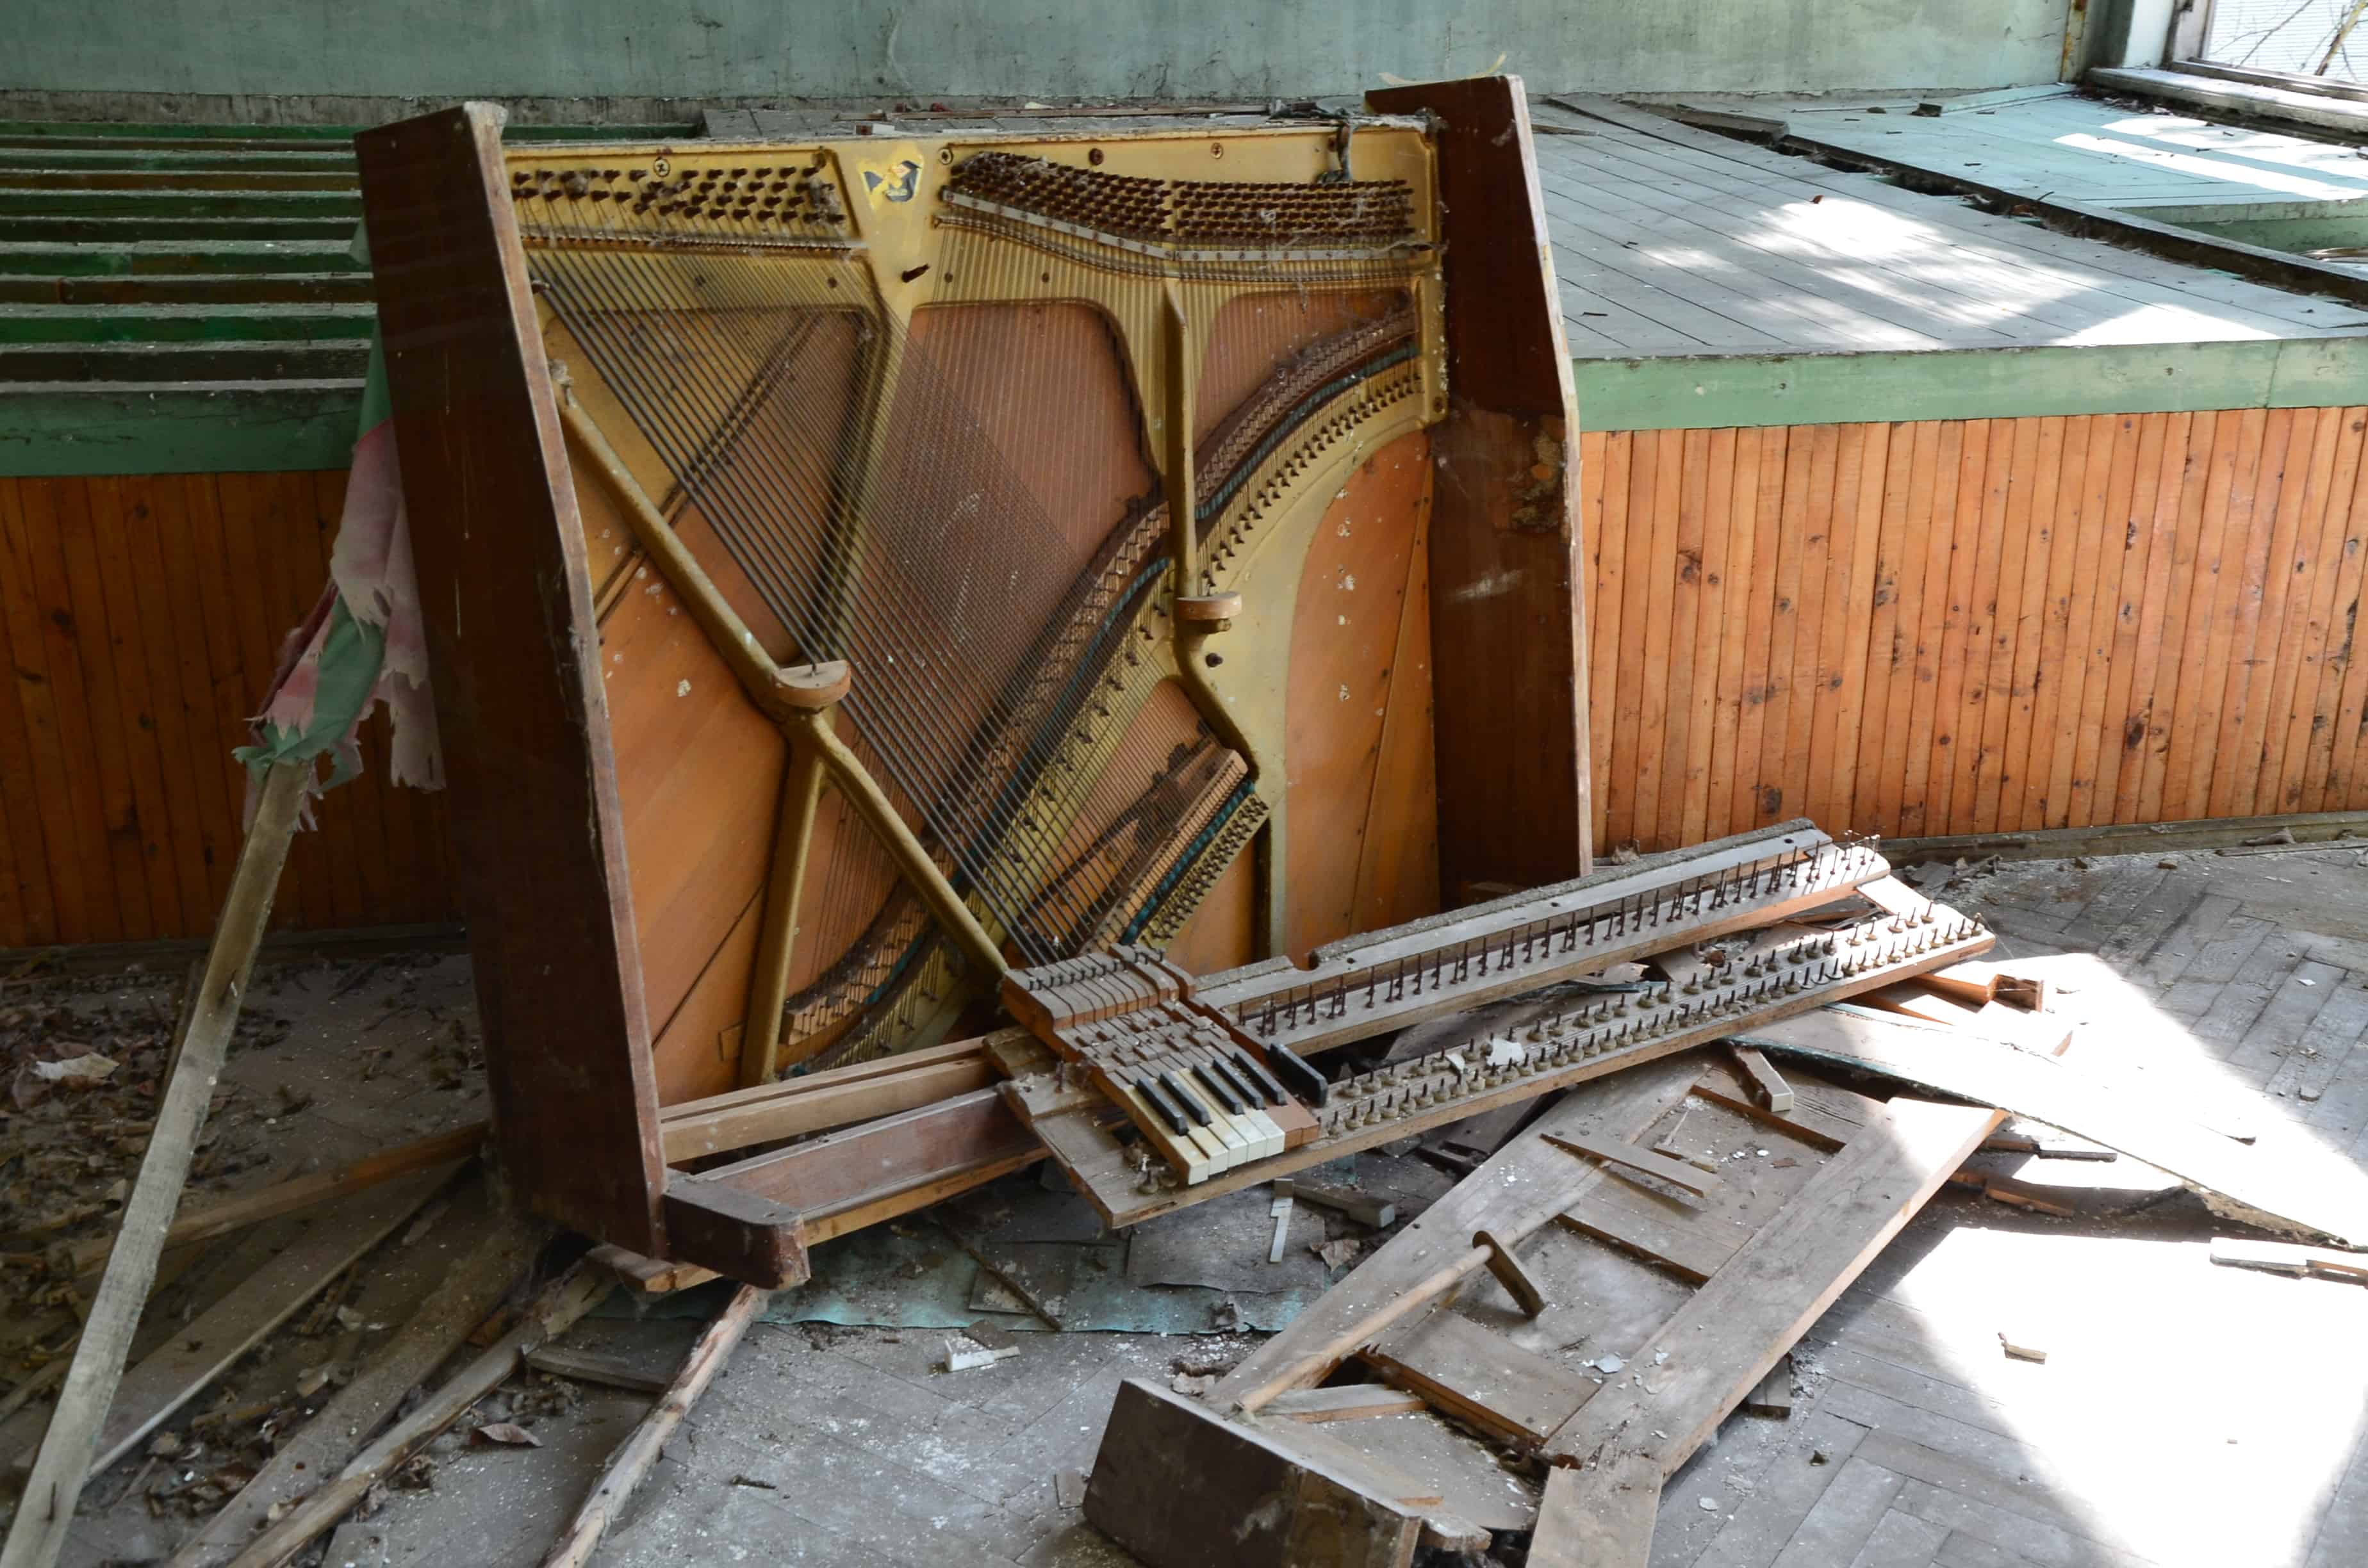 Performance hall at Middle School #5 in Pripyat, Chernobyl Exclusion Zone, Ukraine